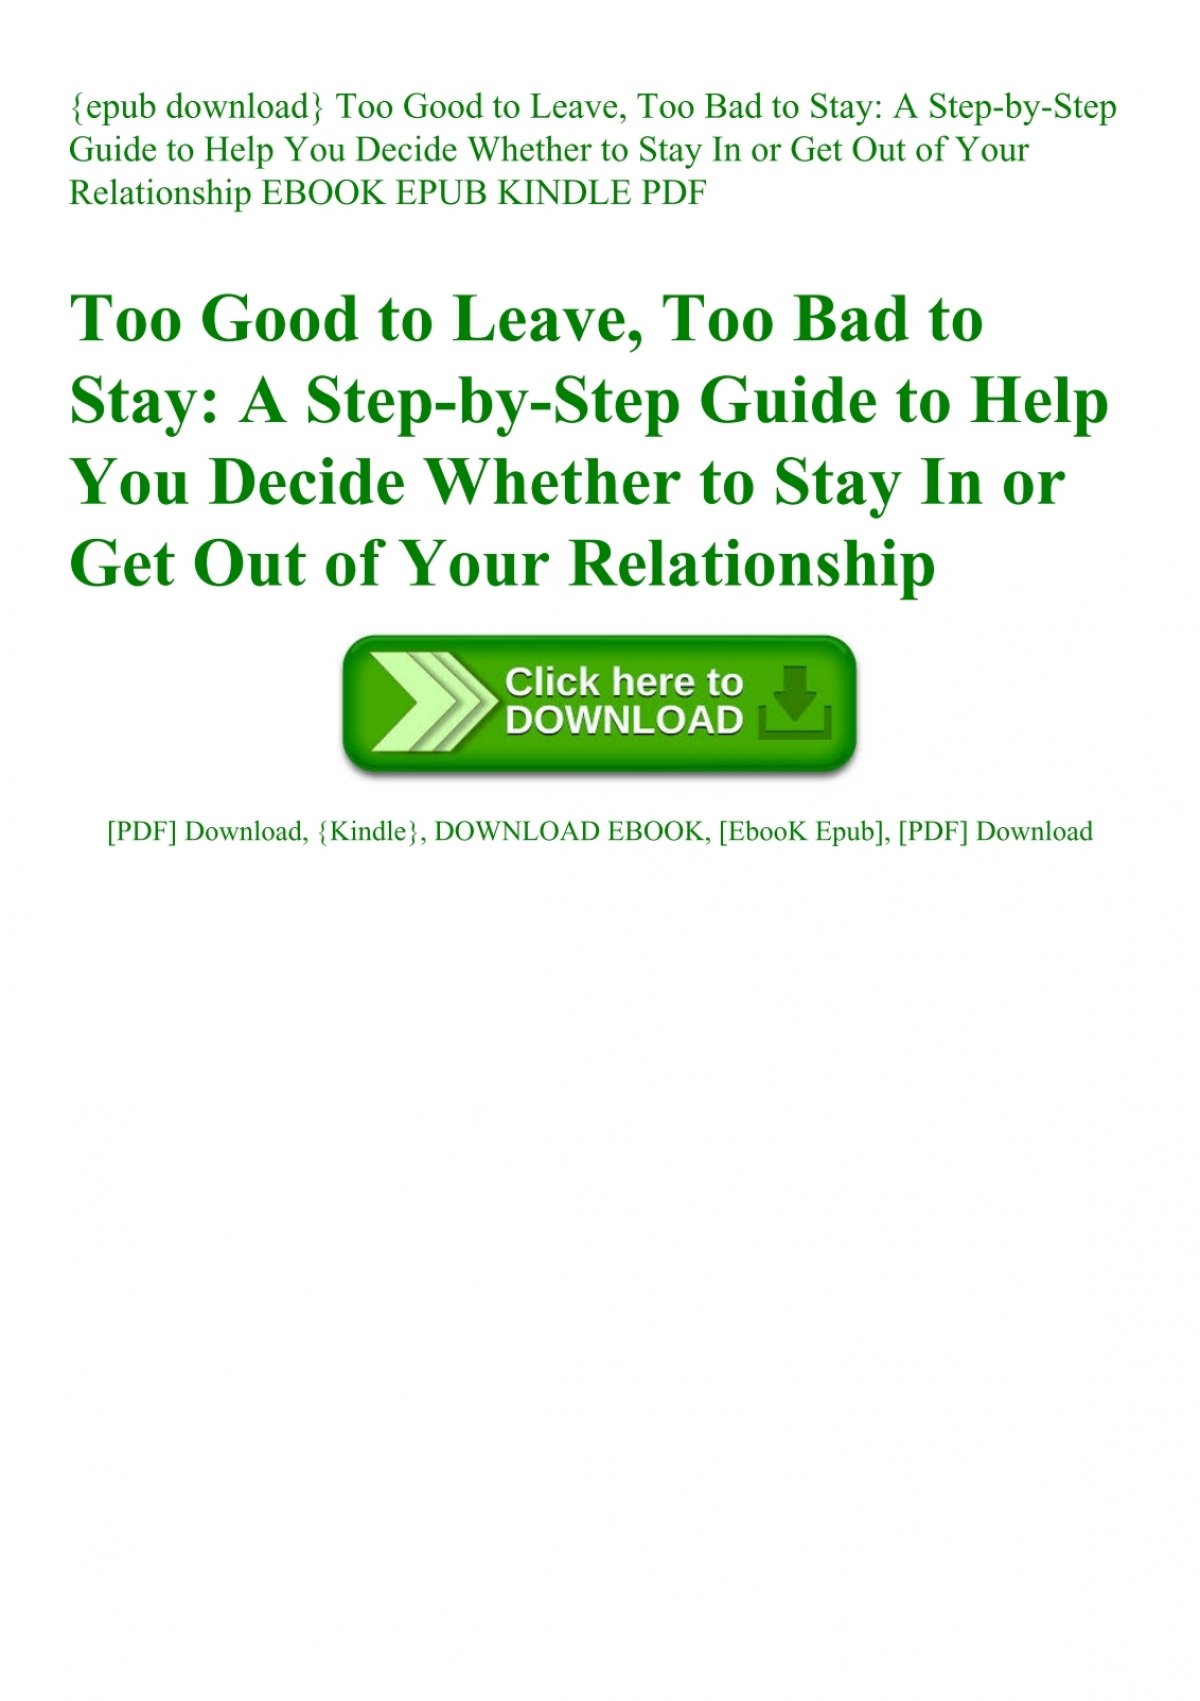 Epub Download Too Good To Leave Too Bad To Stay A Step By Step Guide To Help You Decide Whether T